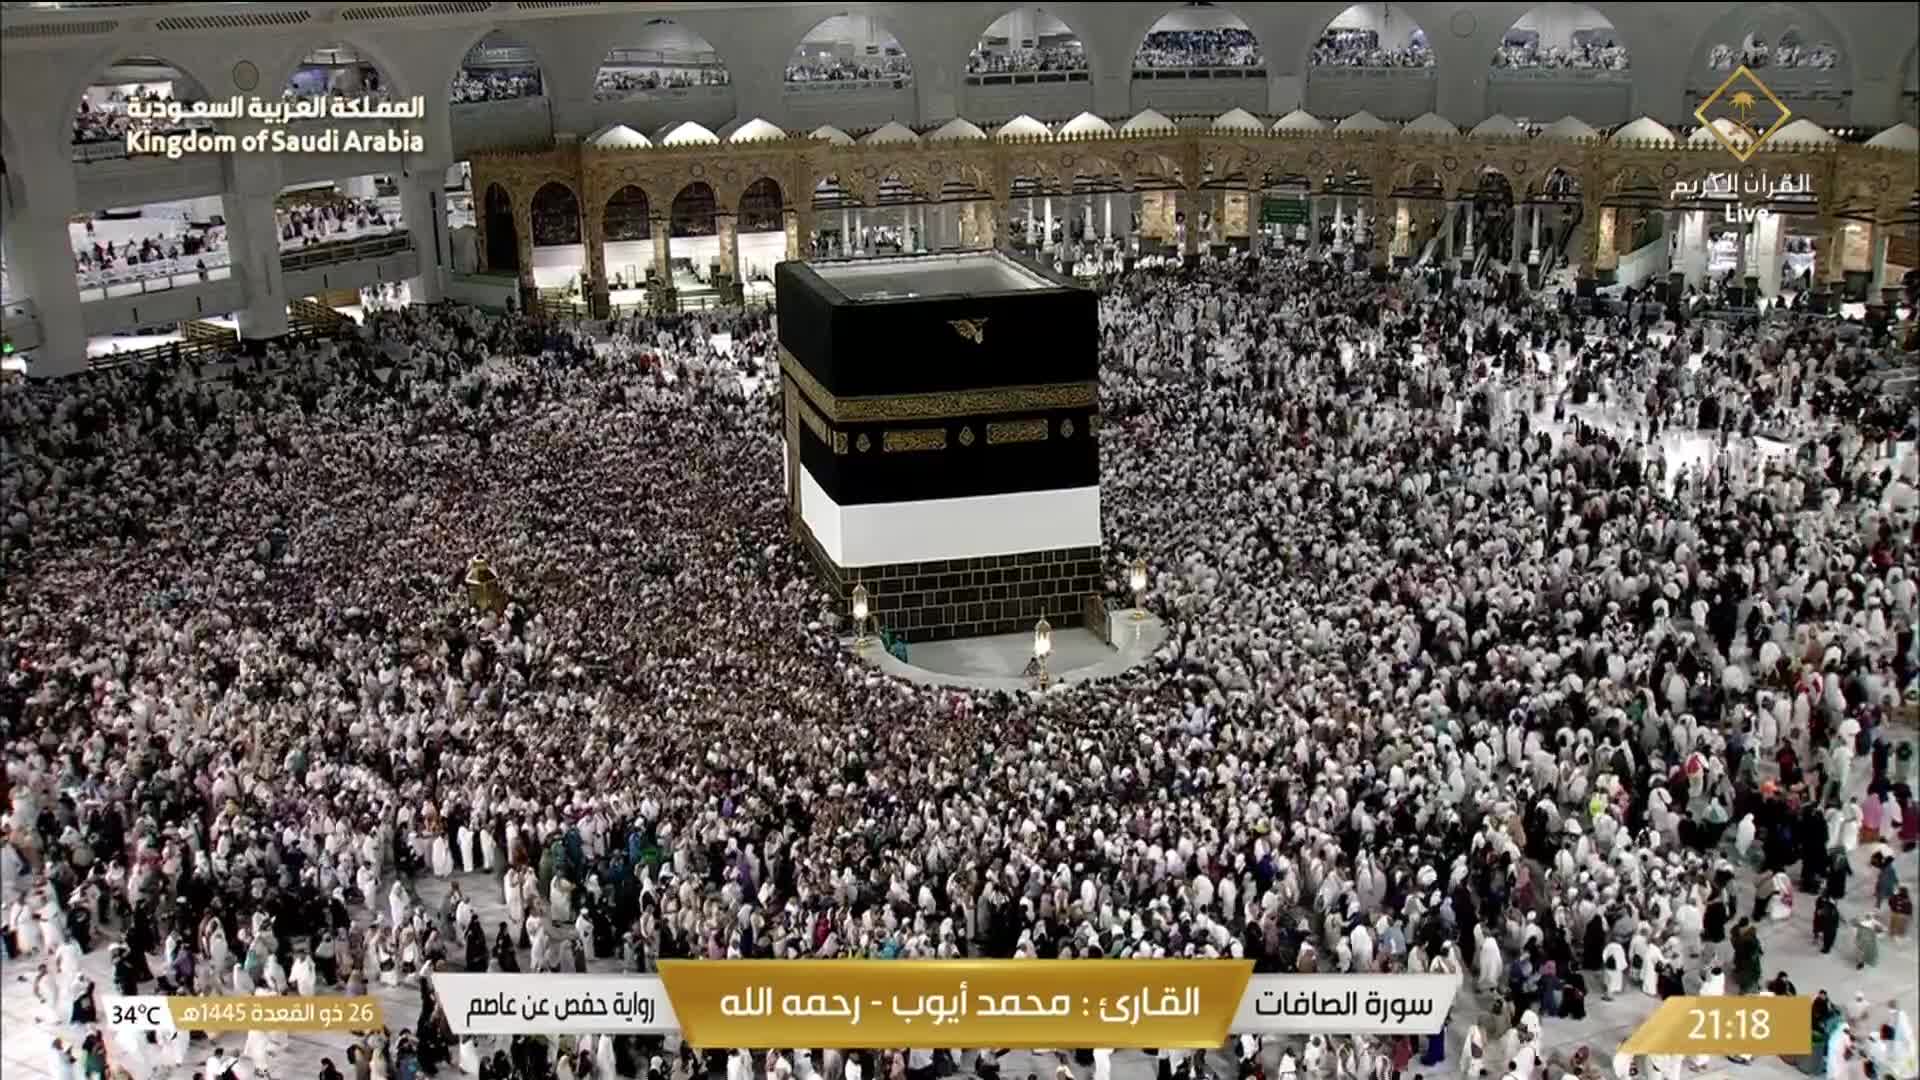 Mecca Wed. 21:36